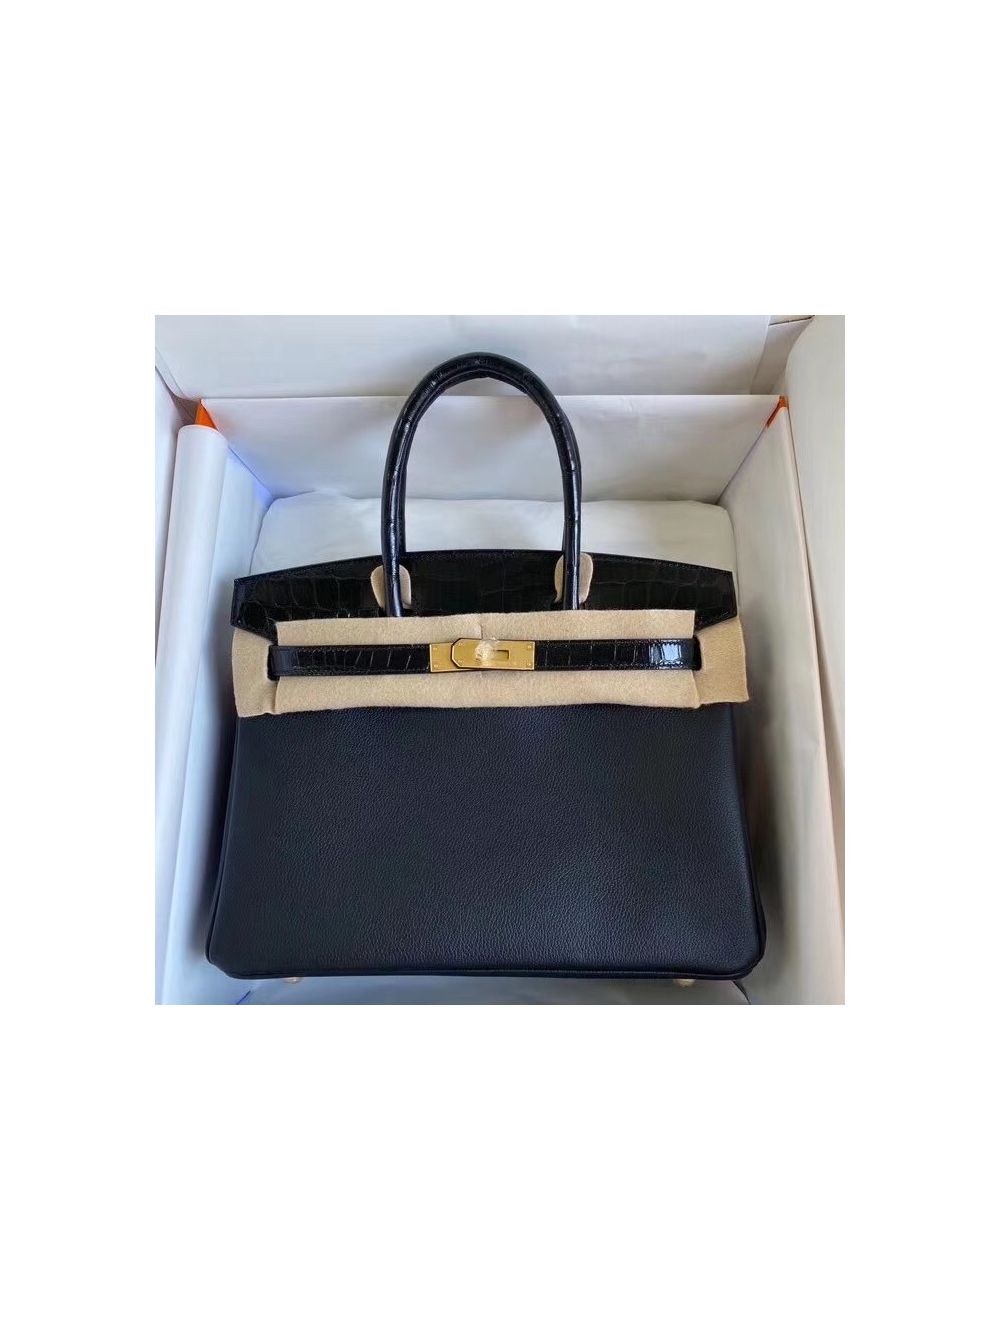 Replica Hermes Touch Birkin 30 Bag In Black Clemence and Shiny